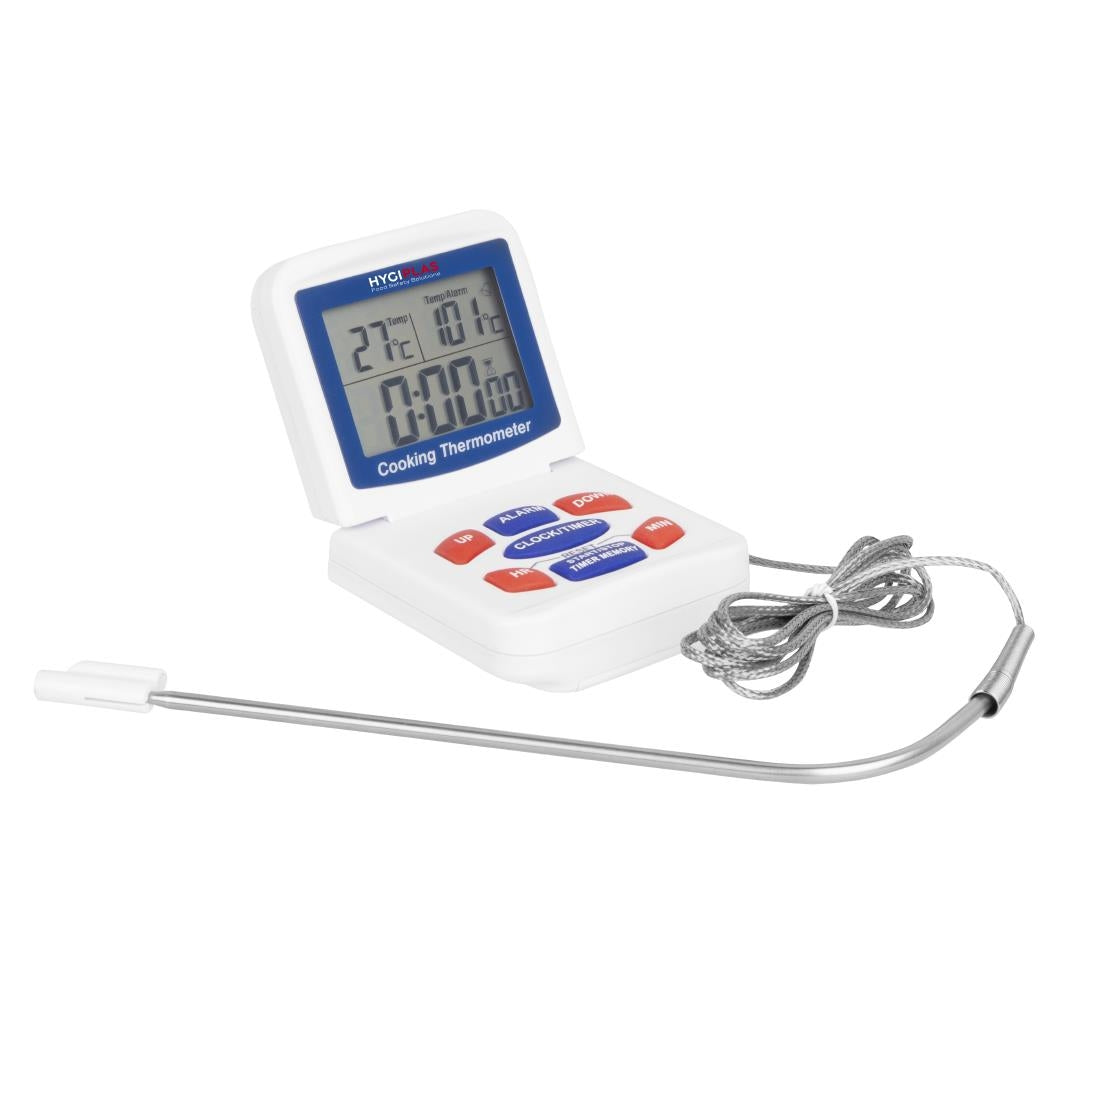 Hygiplas Oven Digital Cooking Thermometer JD Catering Equipment Solutions Ltd